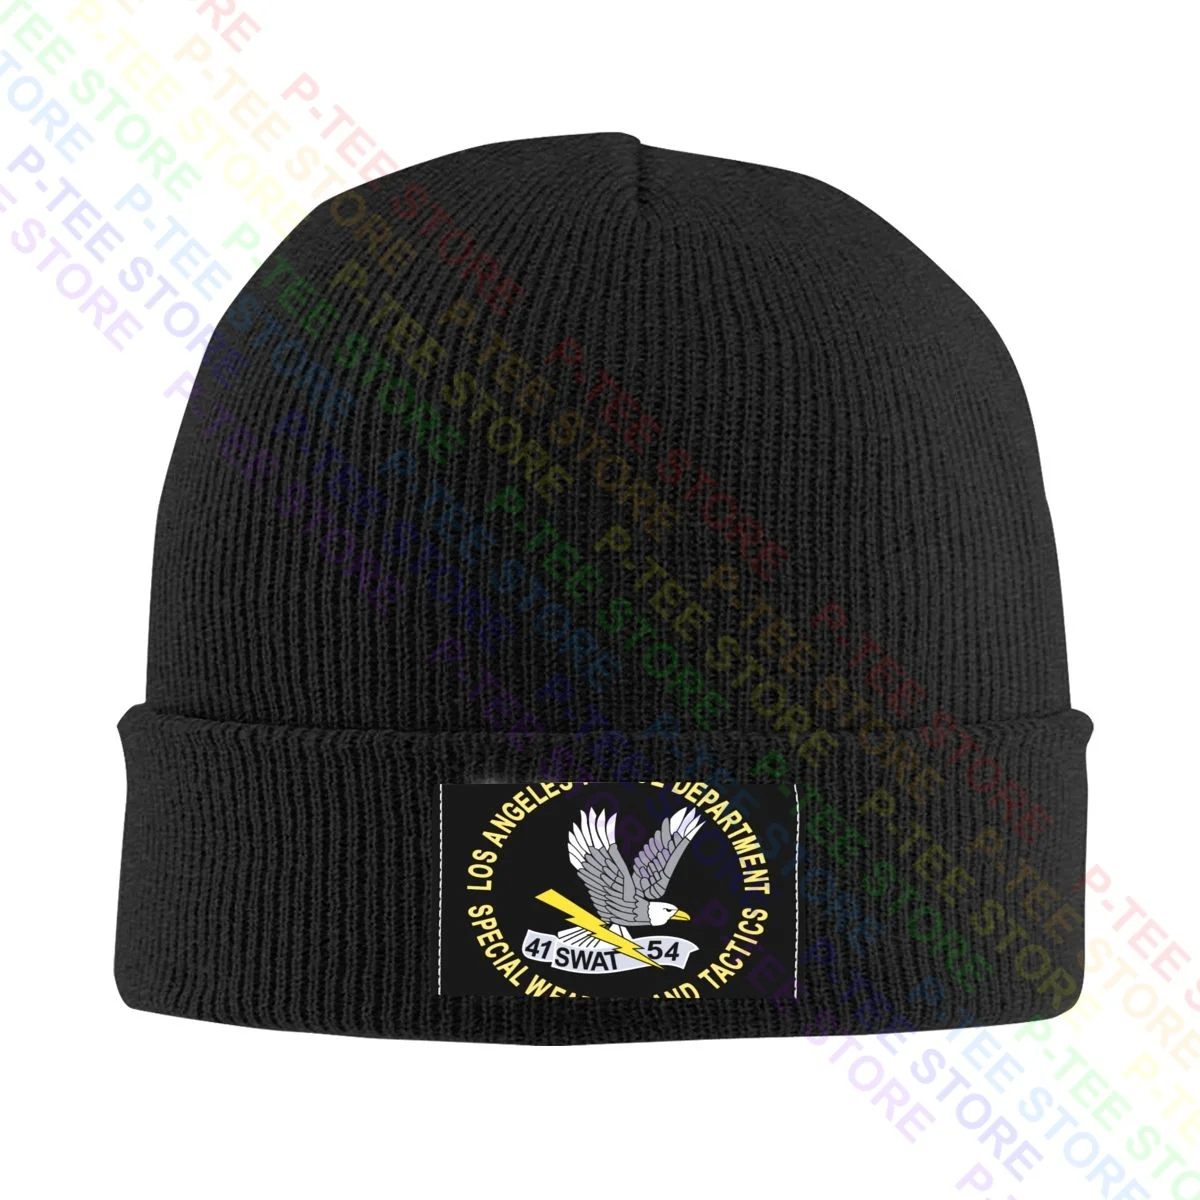 Lapd Los Angeles Swat Police Knitted Beanie Hat Beanies Cap Unisex Hipster Adjustable